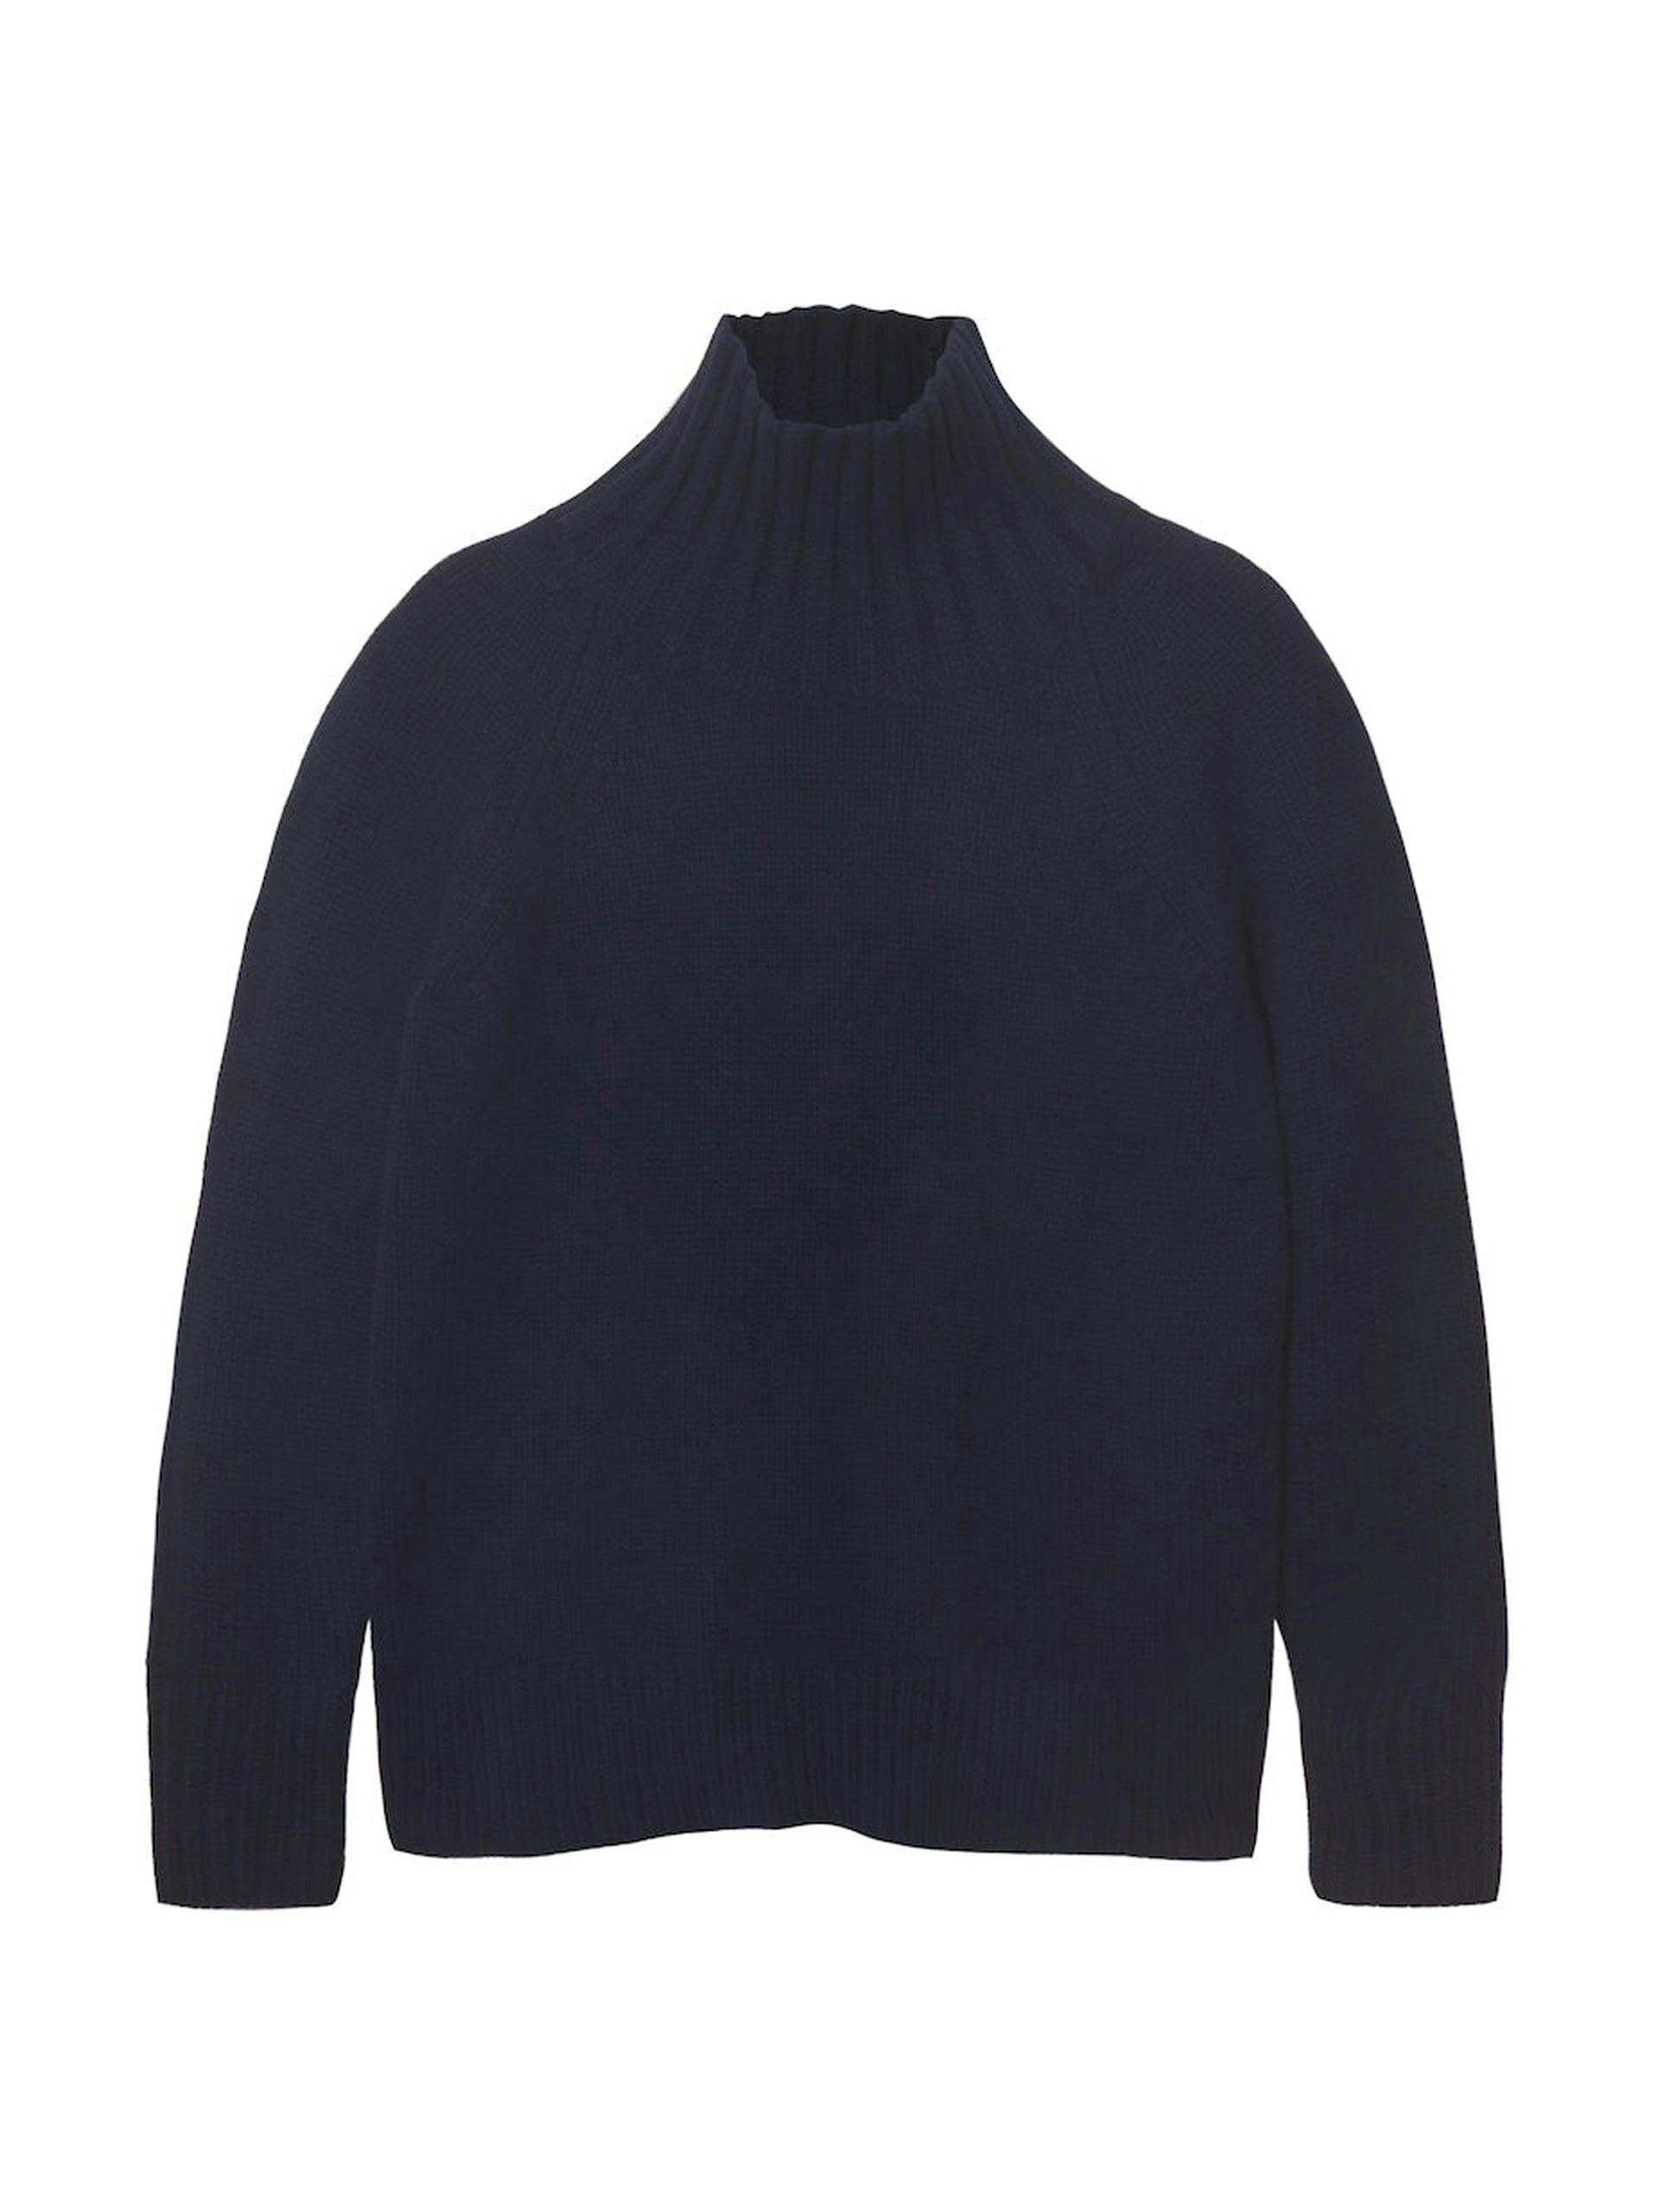 The Authentic funnel knit in navy marl